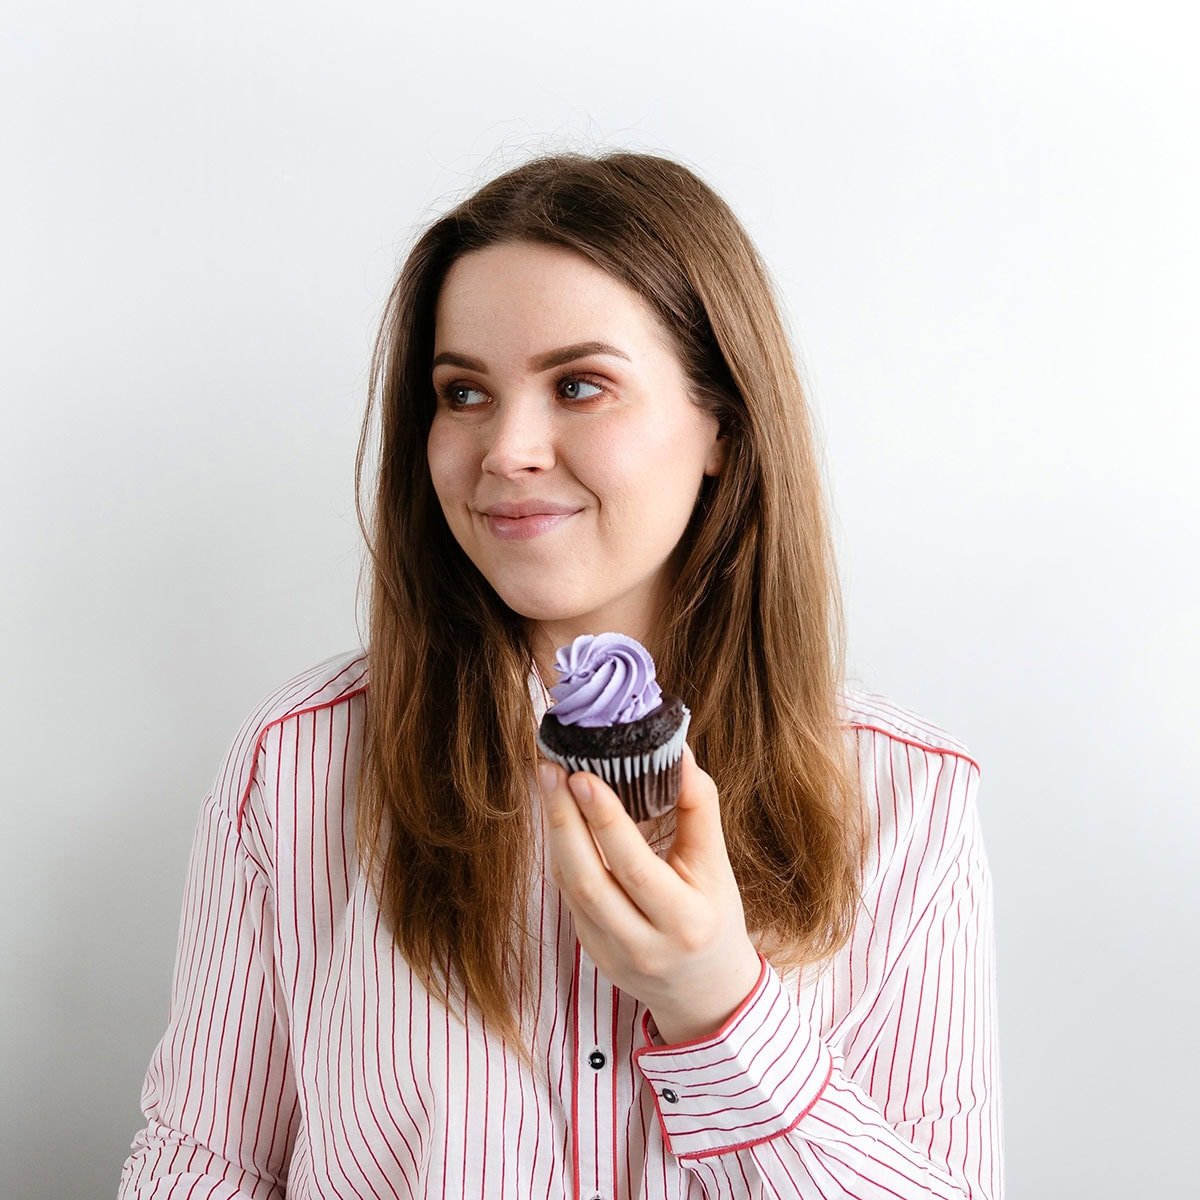 A photo of a young woman in a white and red striped shirt holding a chocolate cupcake with pruple frosting on a white backround.